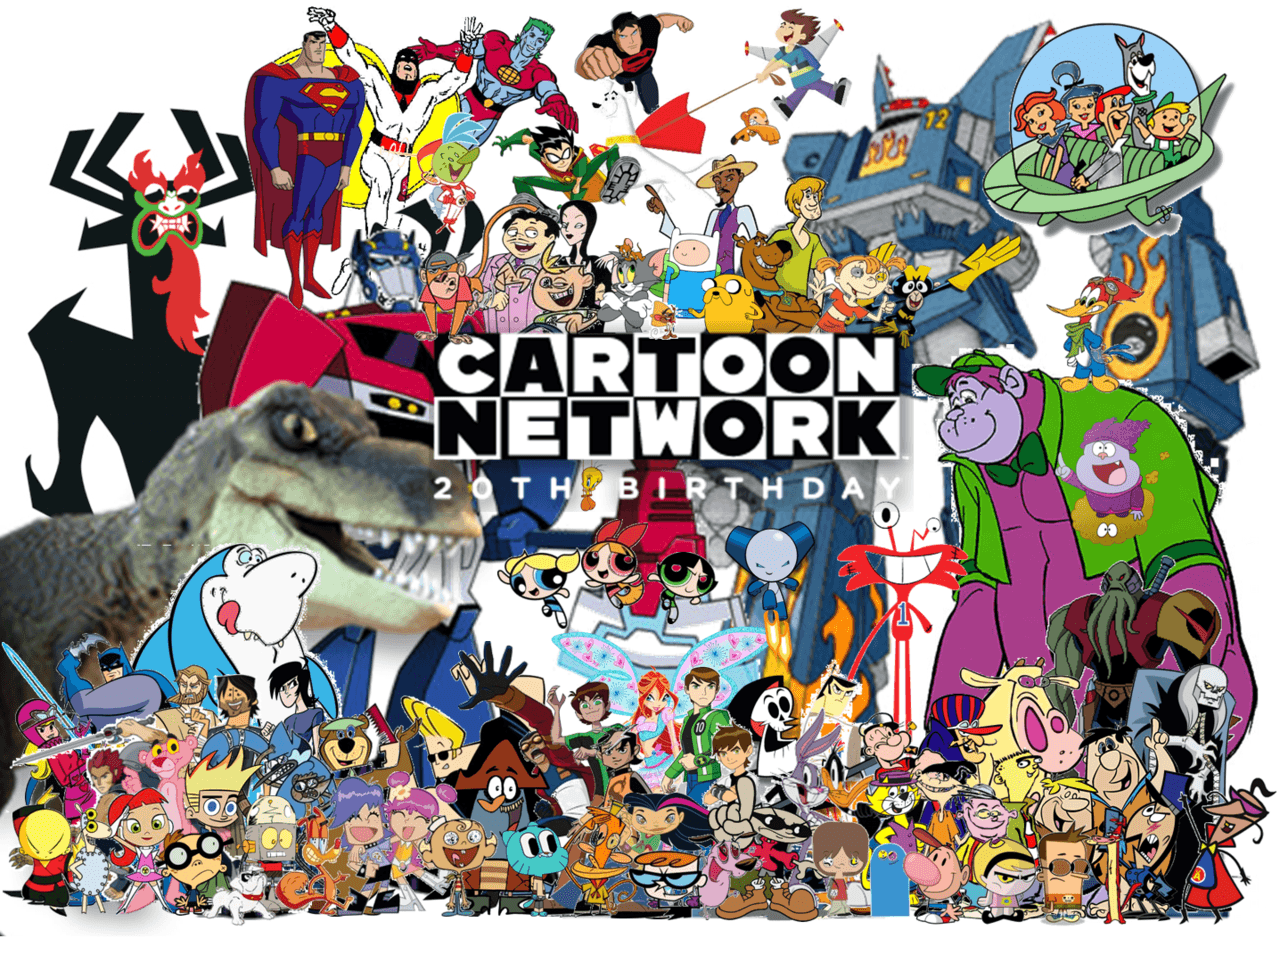 Cartoon Network Characters 2013 HD Wallpaper, Background Image